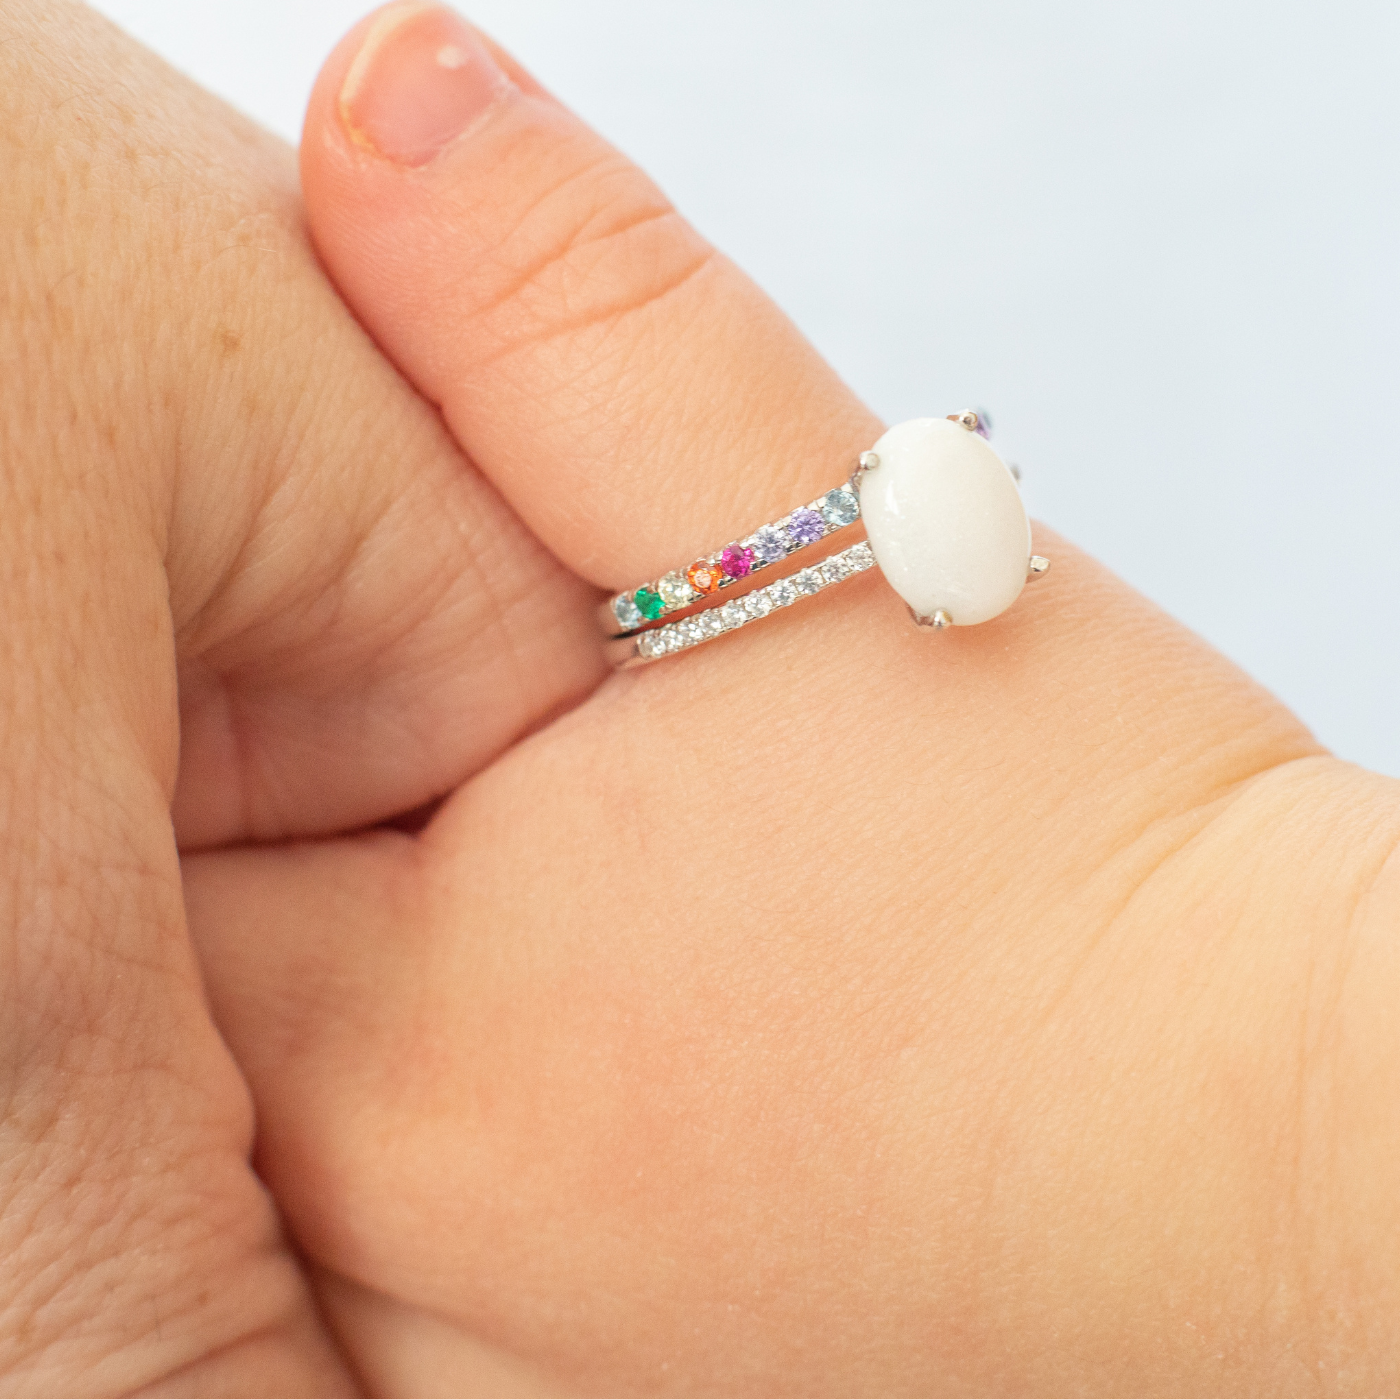 Breast-Milk Jewelry Is Extra Meaningful for Bereaved Parents